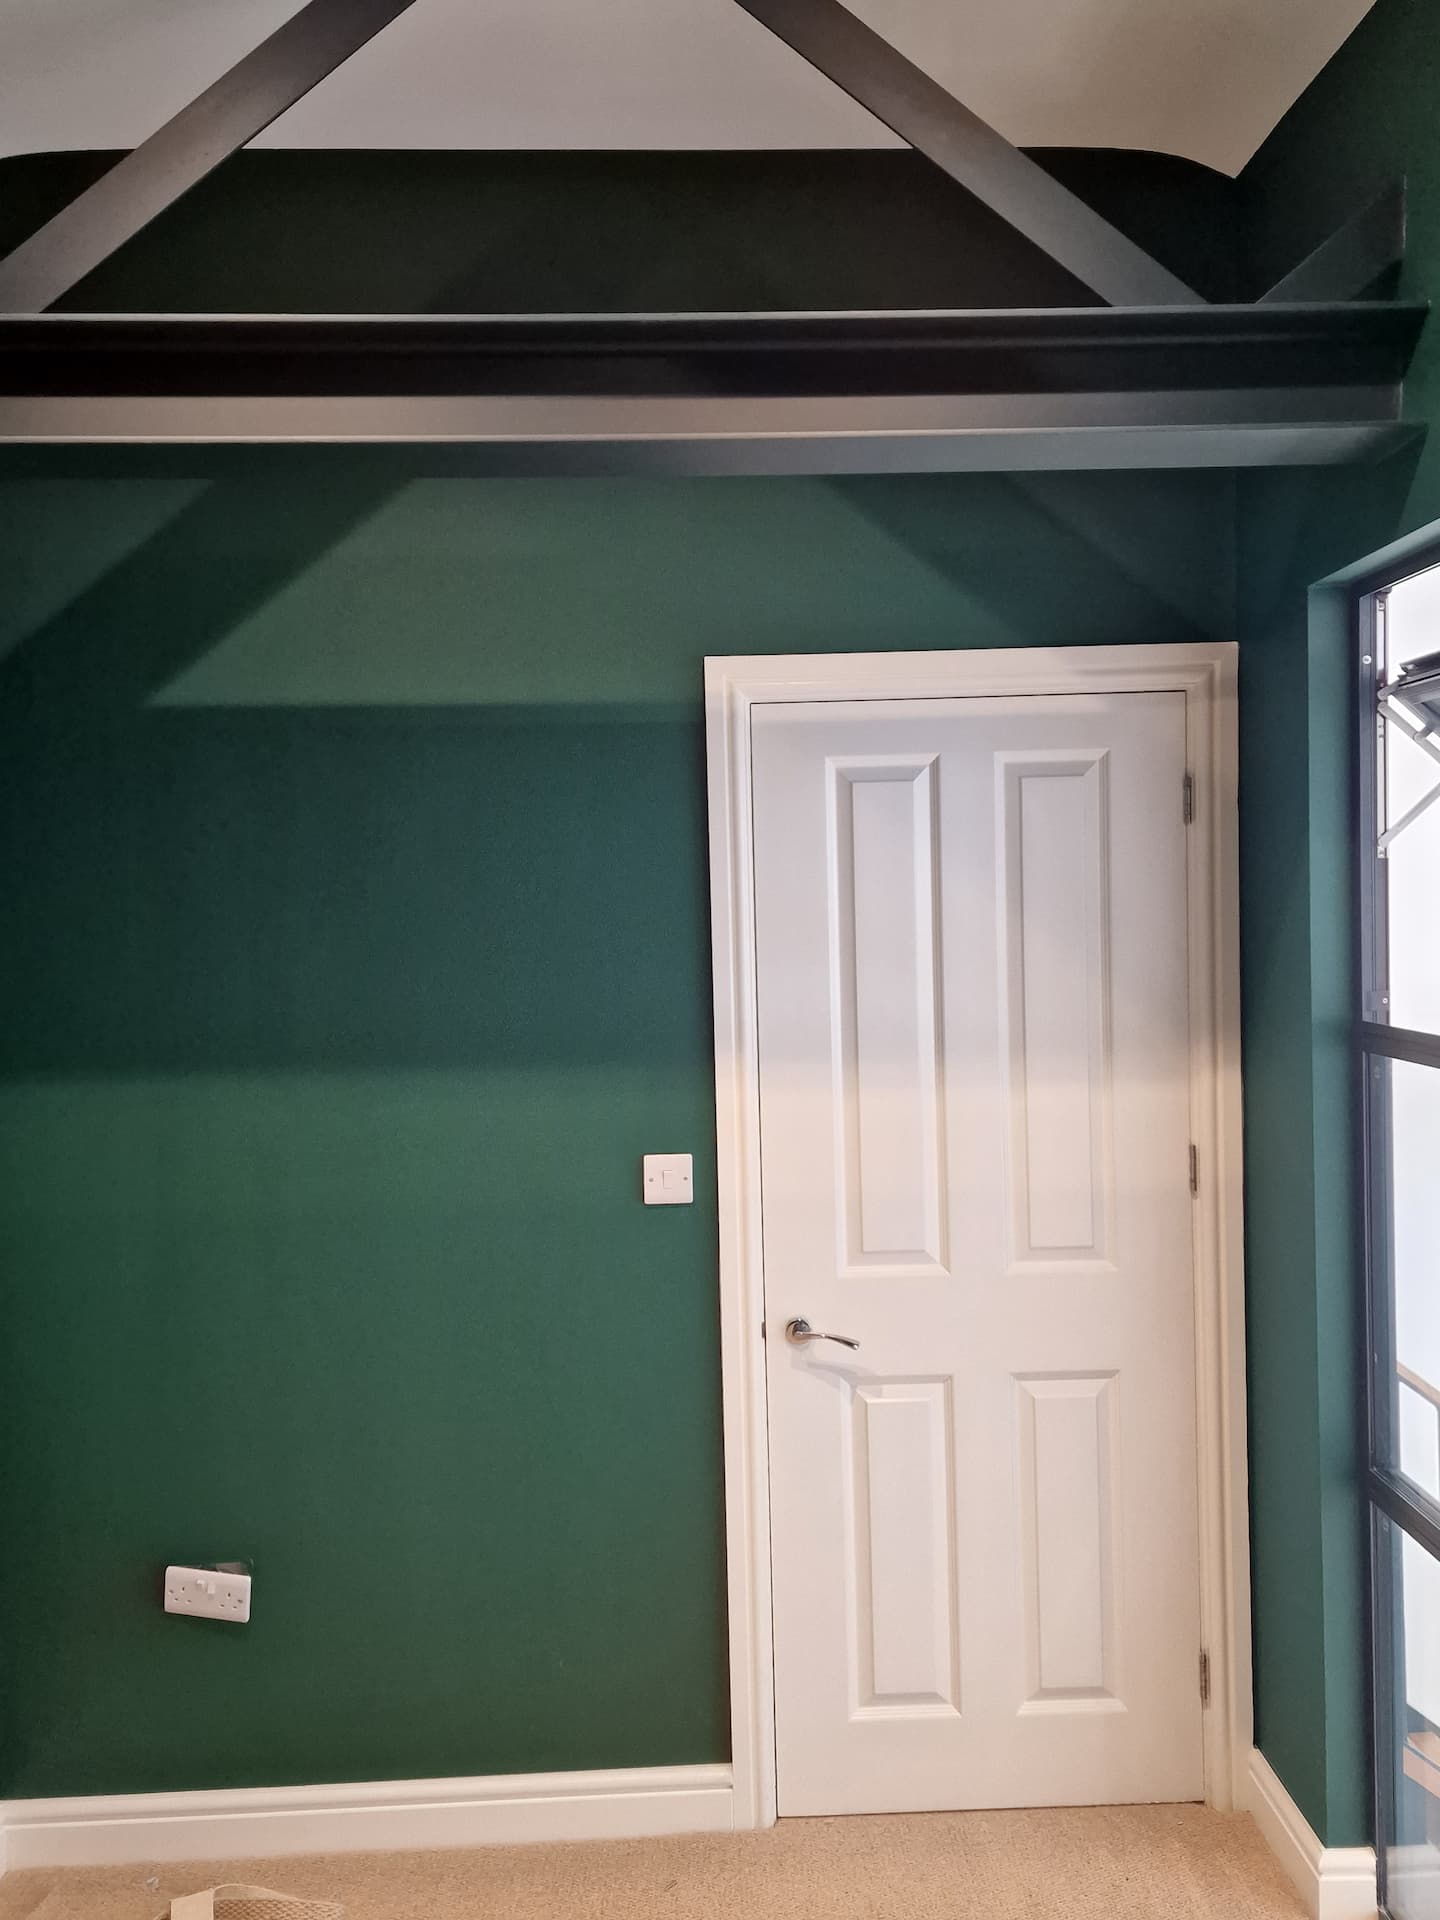 Photo of a room in Winchester, painted and decorated green and white by OA Interior Decor.